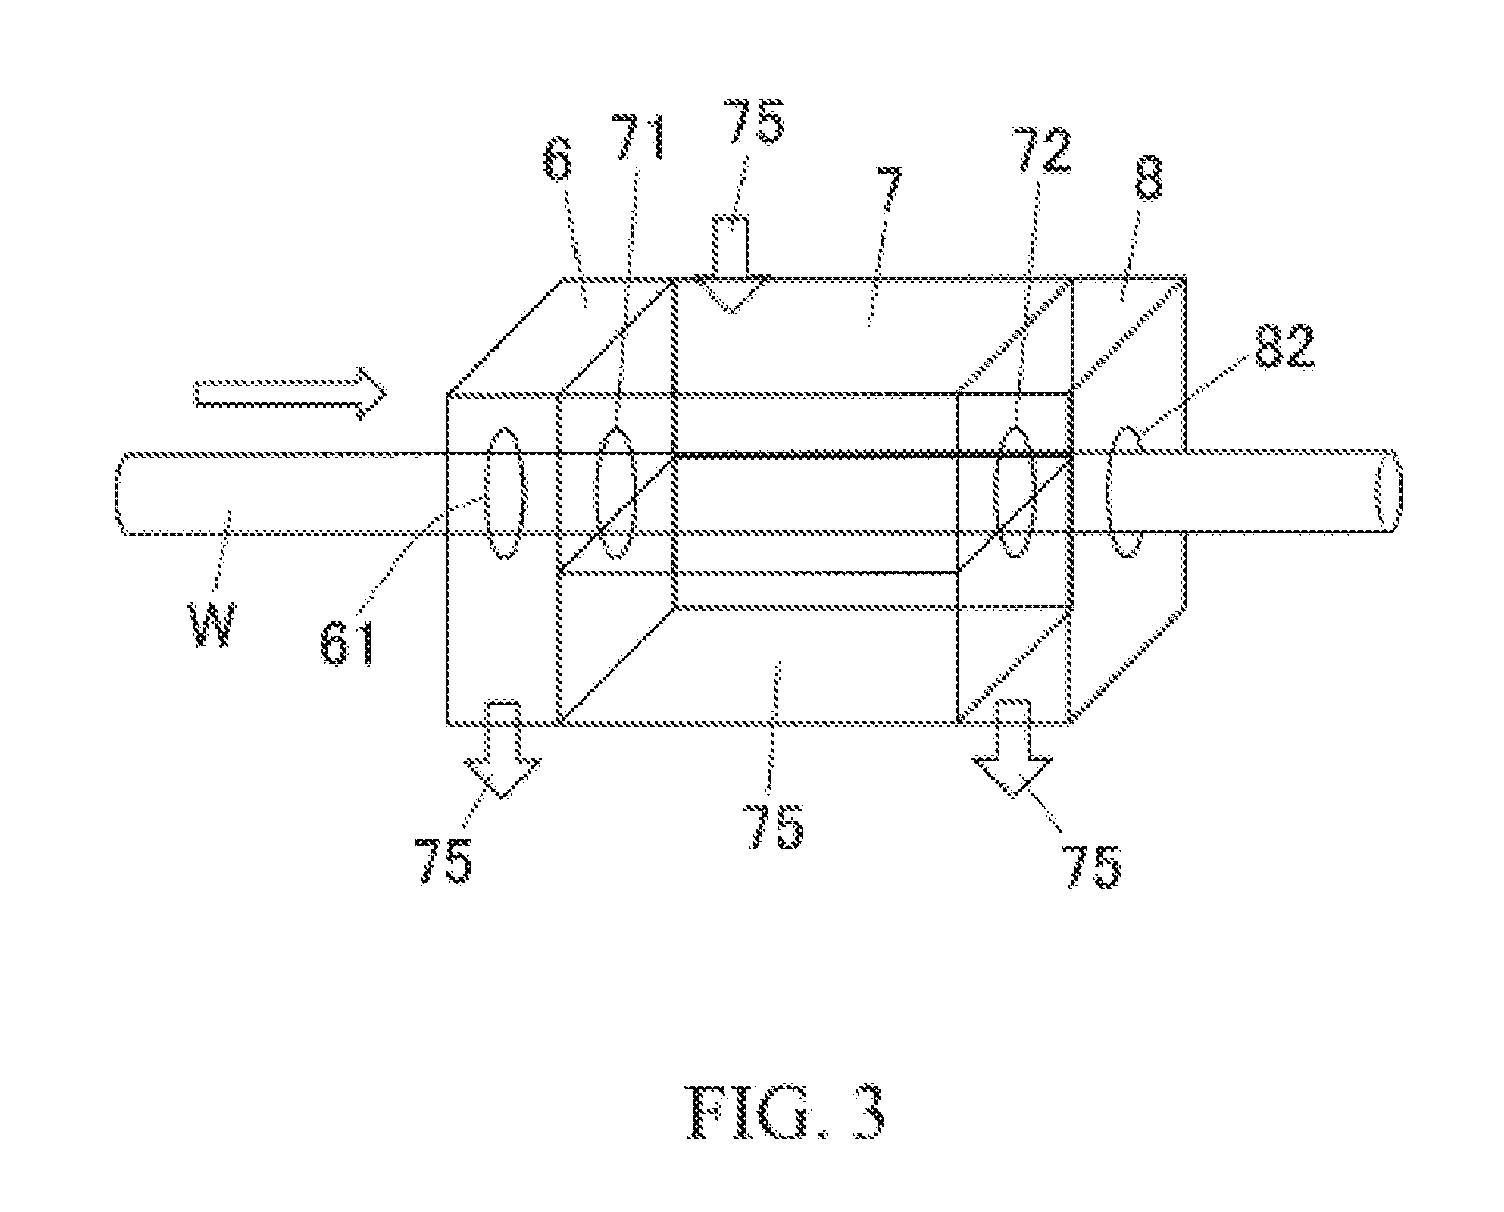 Aluminum bar and method for producing same